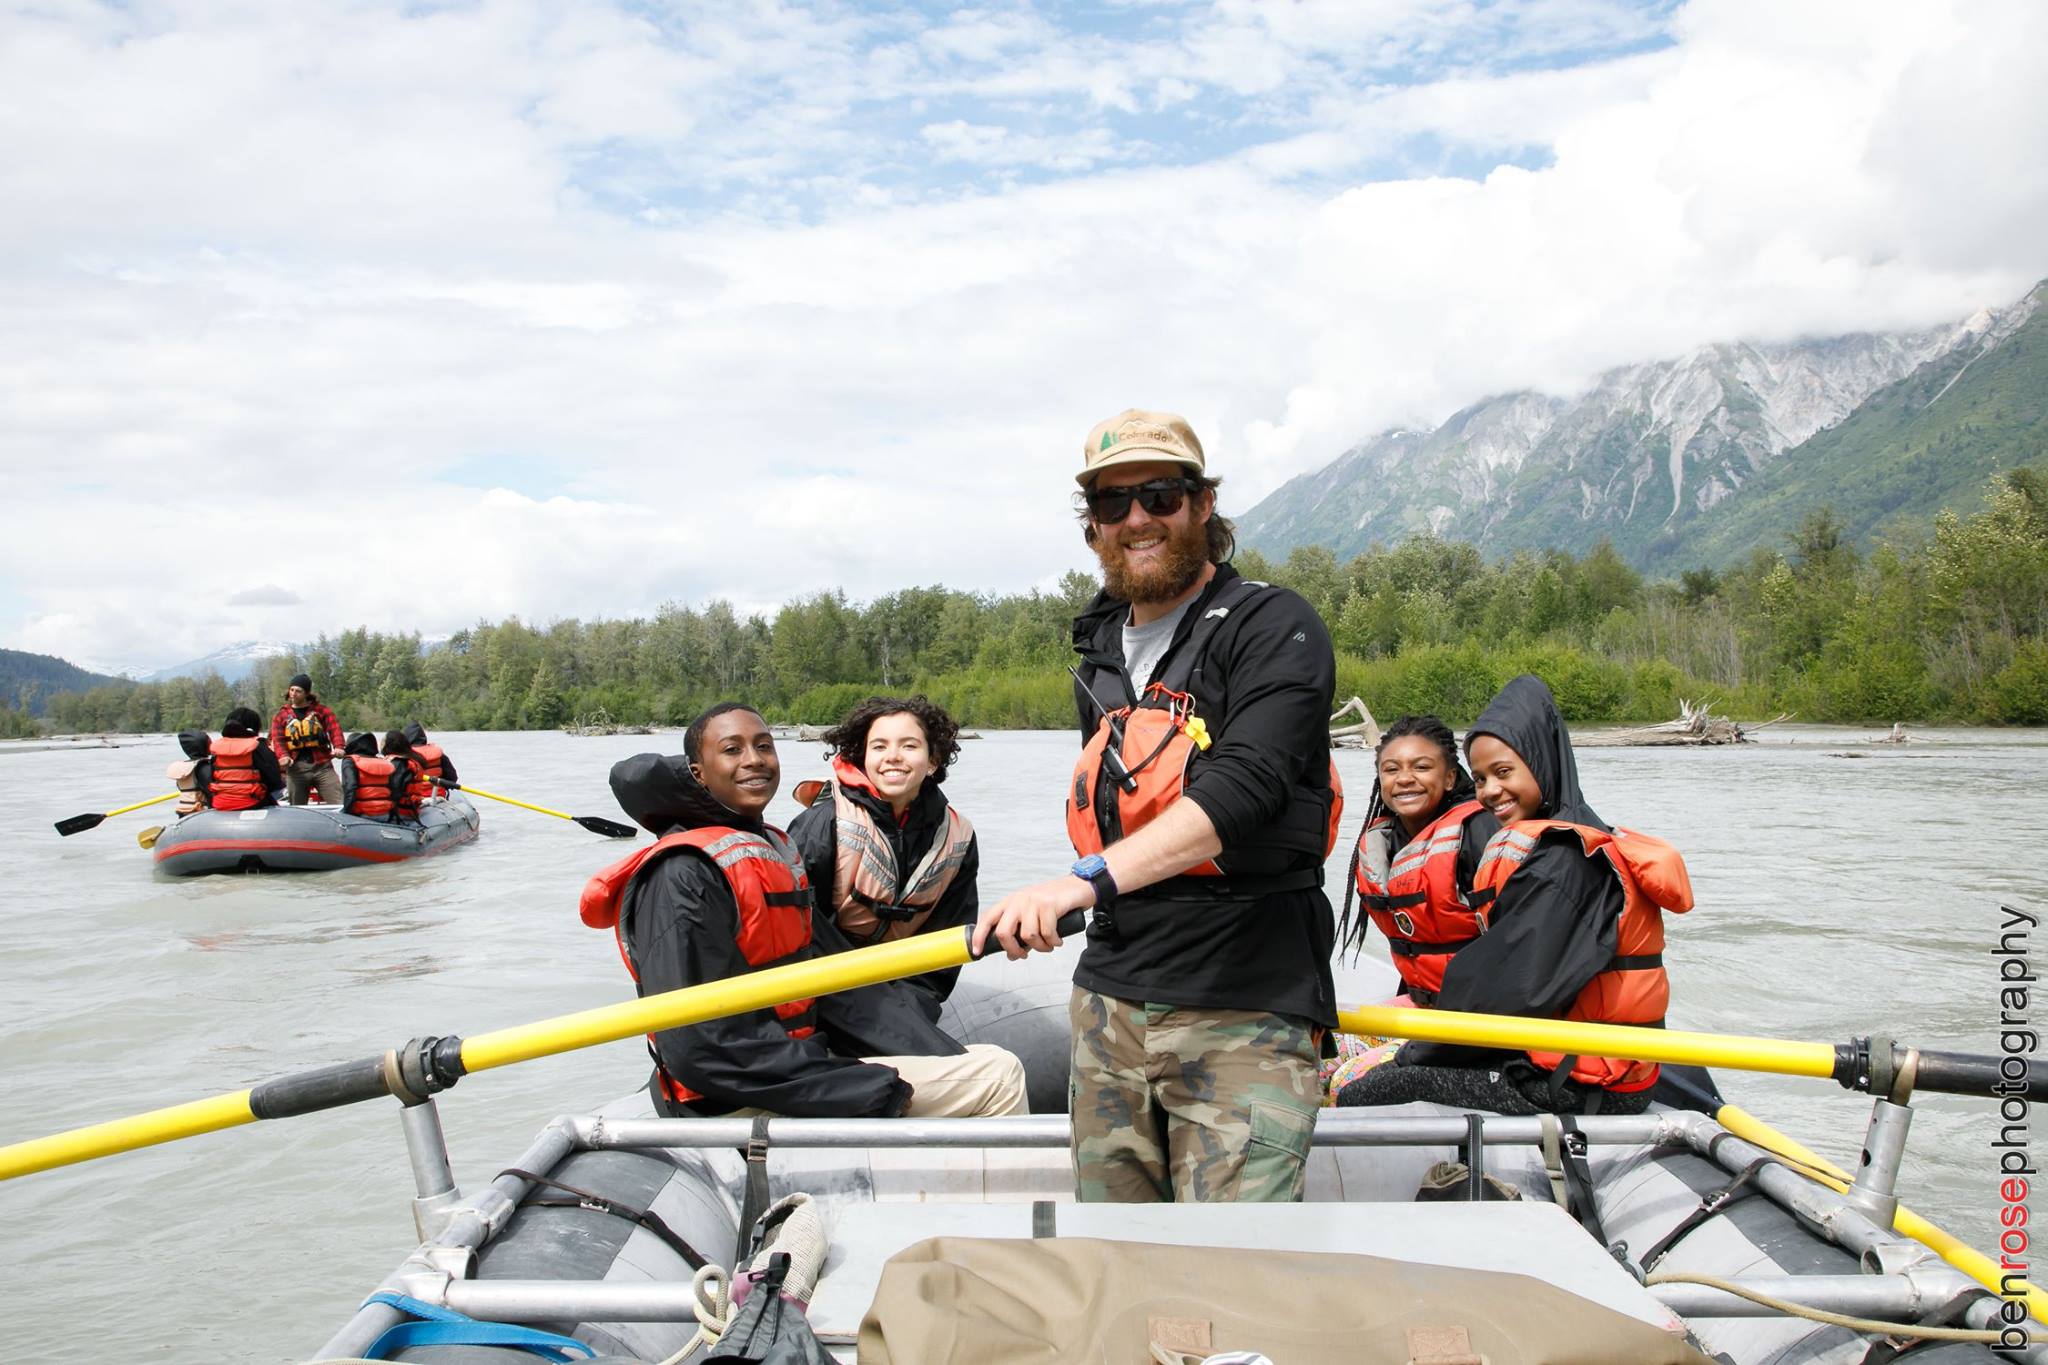 Scouts enjoy a rafting trip on the Chilkat River - Ben Rose Photography